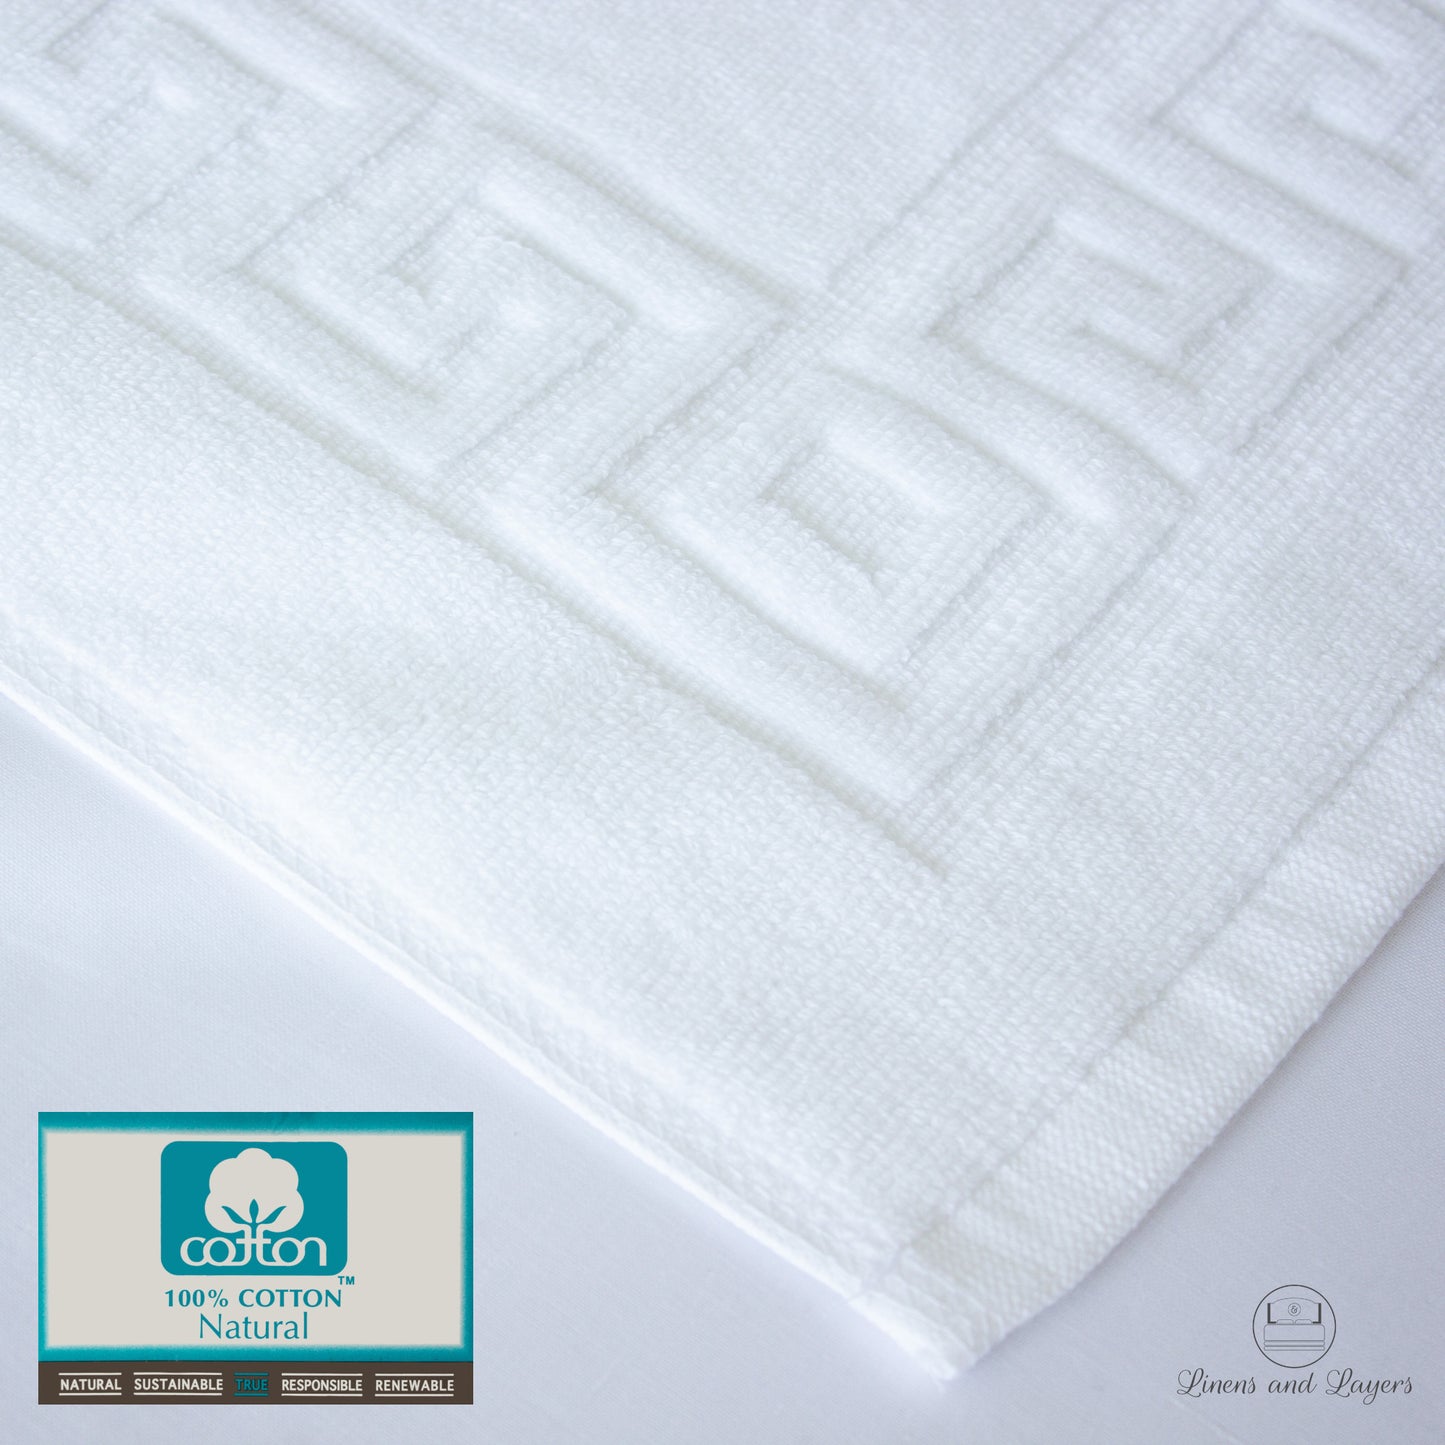 Hotel Quality White Foot Towel / Bath Mat / Floor Towel (775 GSM) - Pure Cotton - 20x30 inches